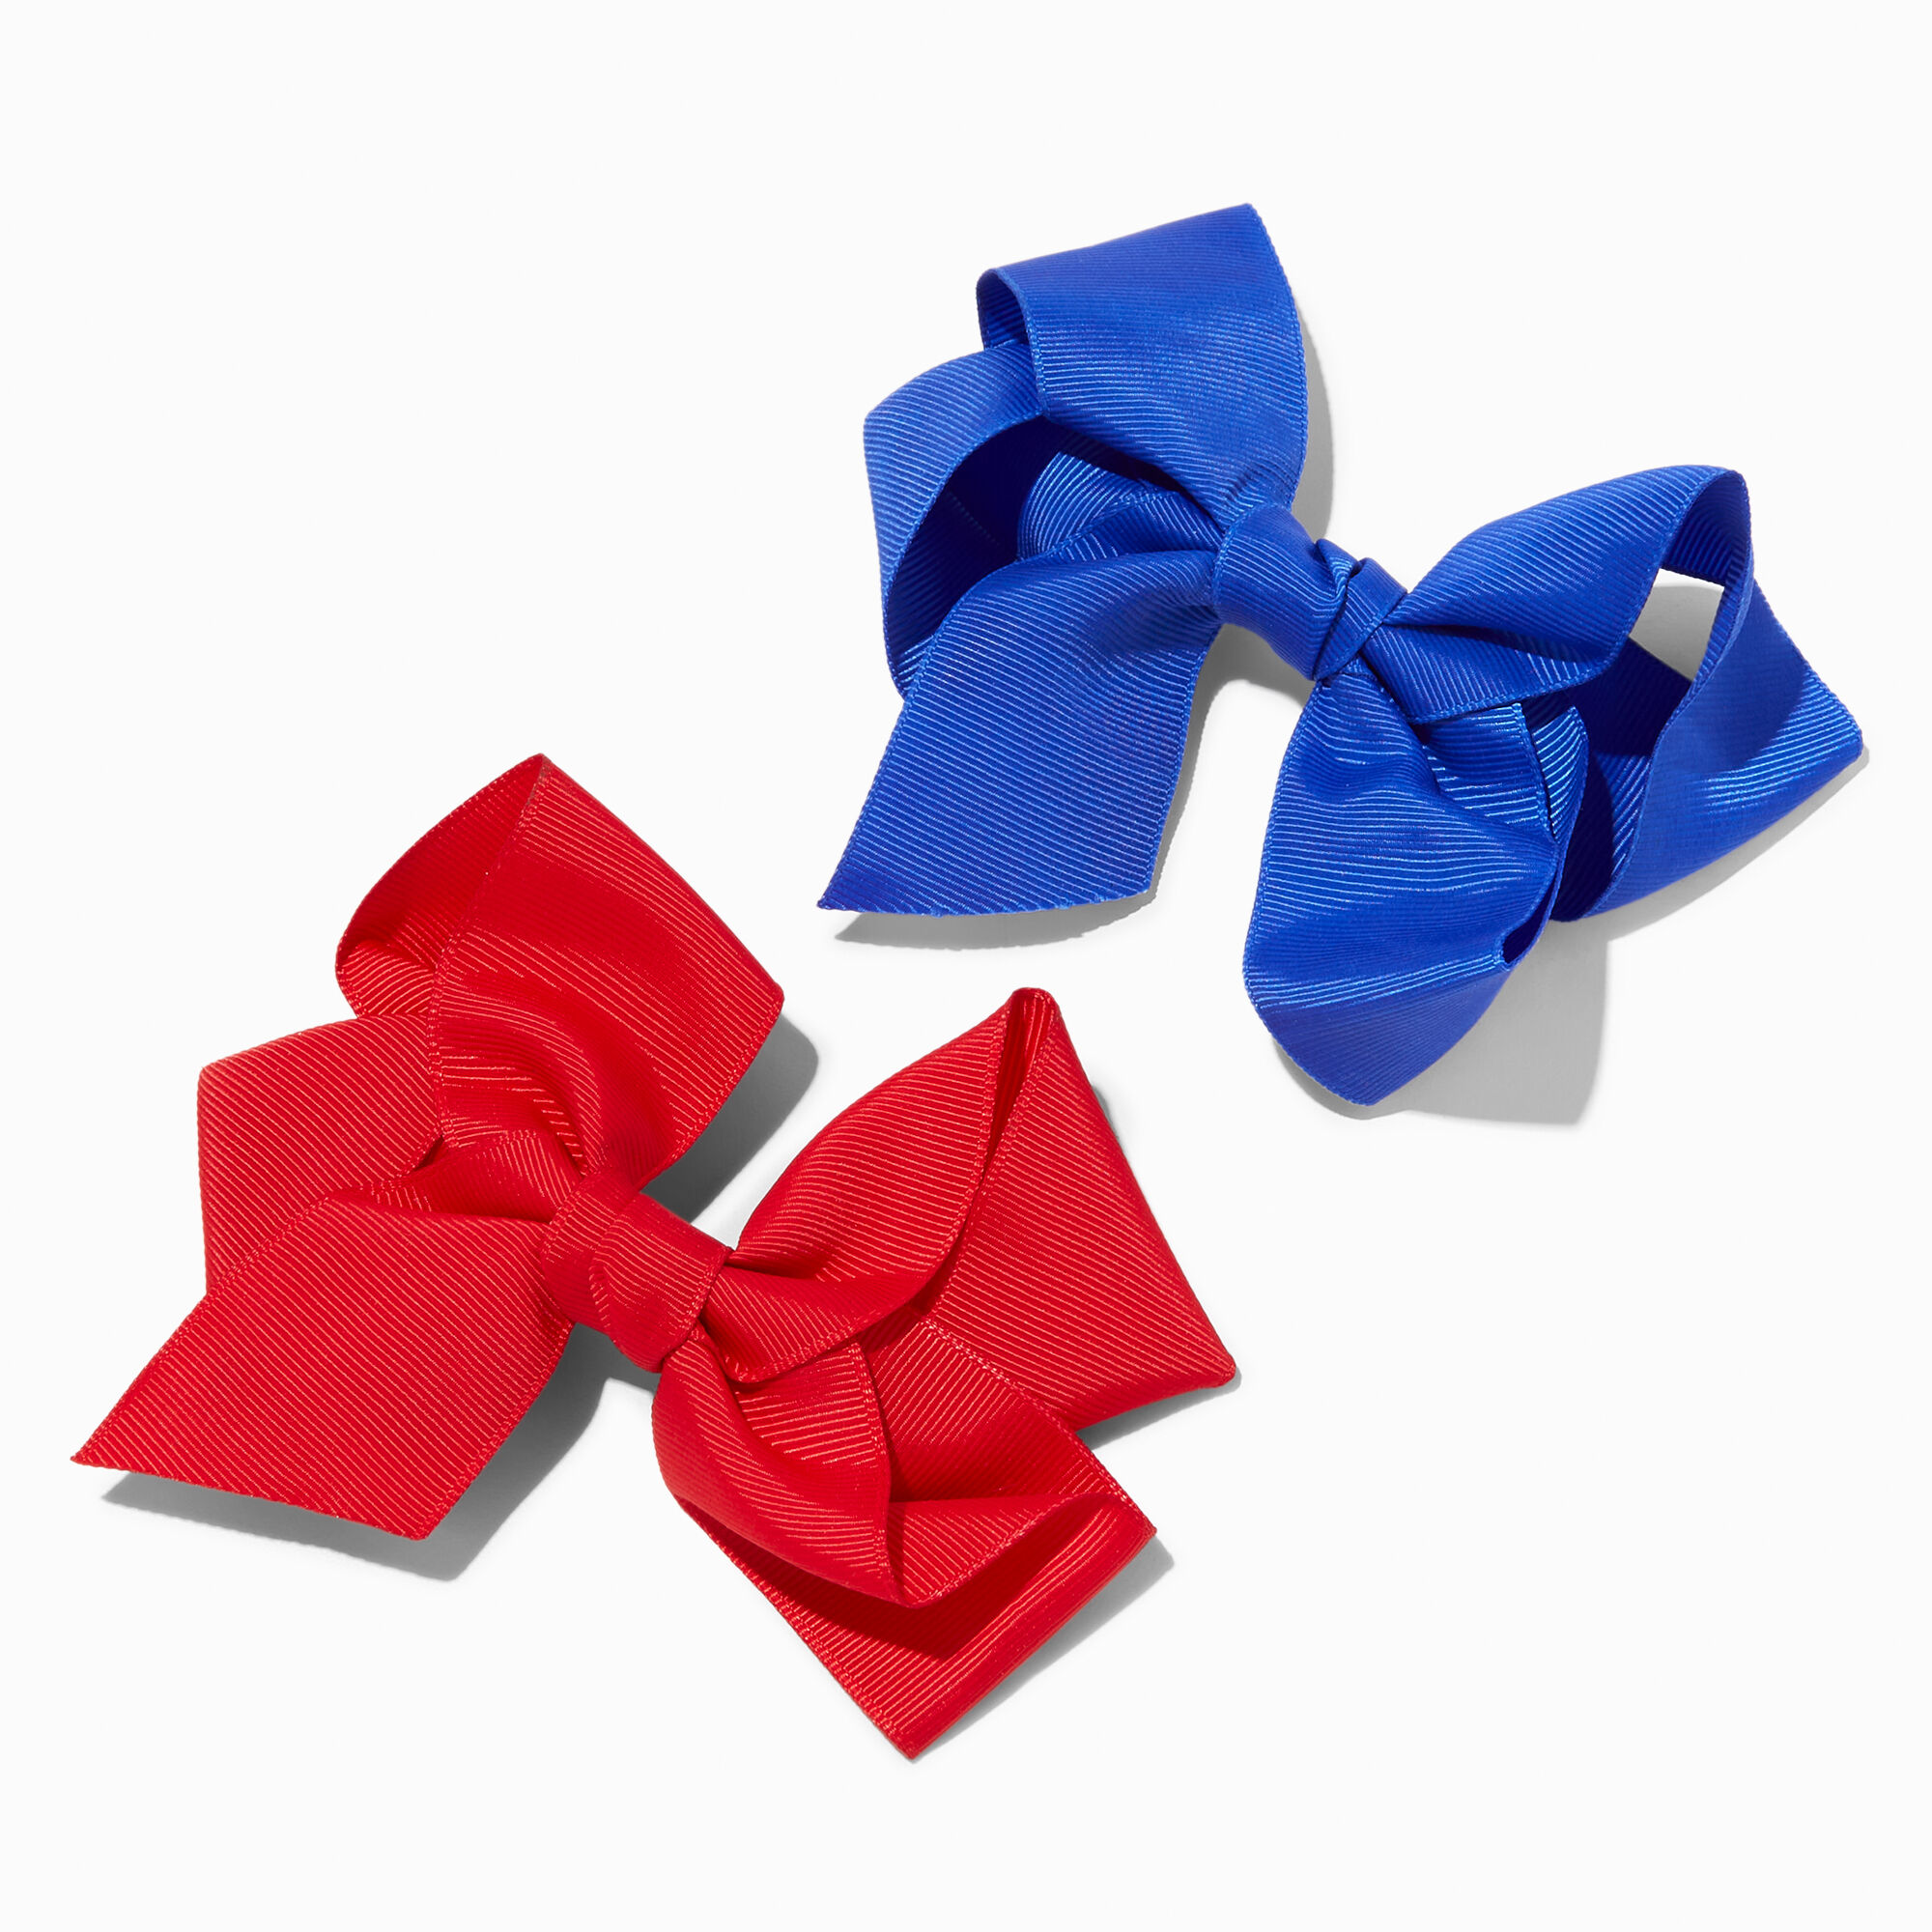 View Claires Red Cheer Bow Hair Barrettes 2 Pack Blue information